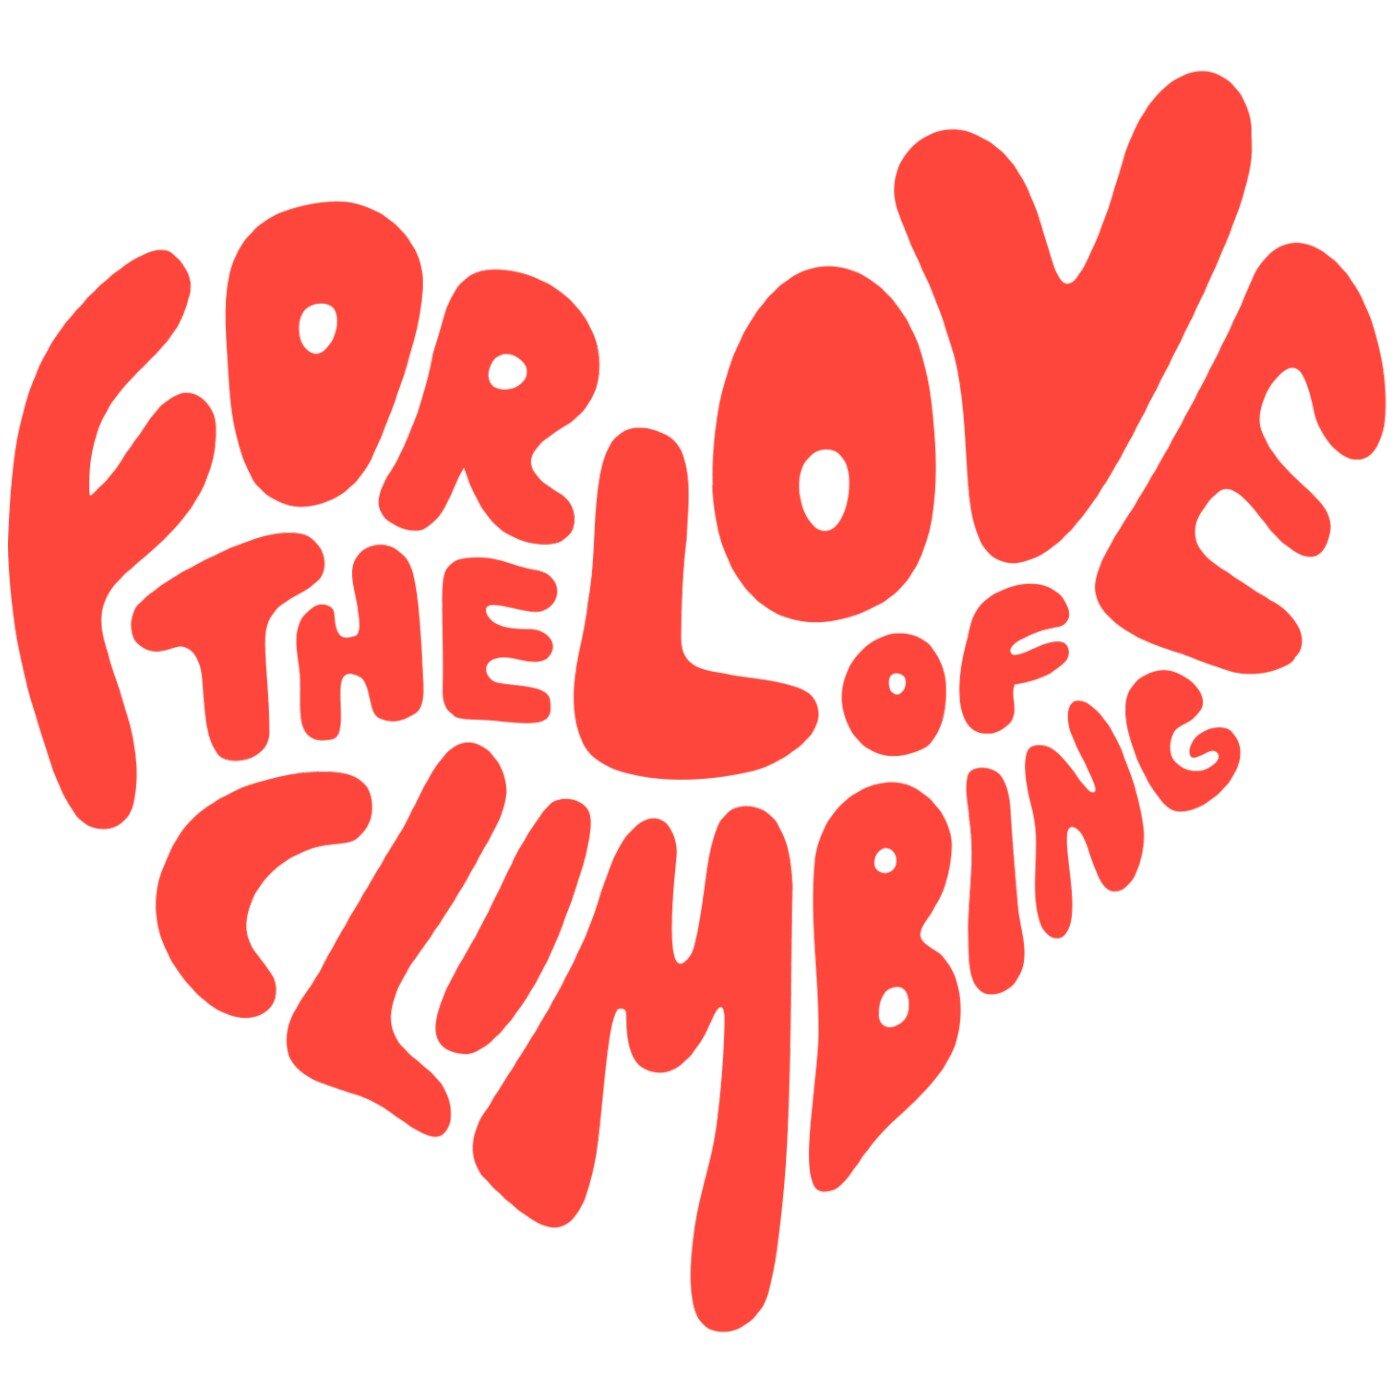 For The Love of Climbing - Episode 18: Life Though a Sieve